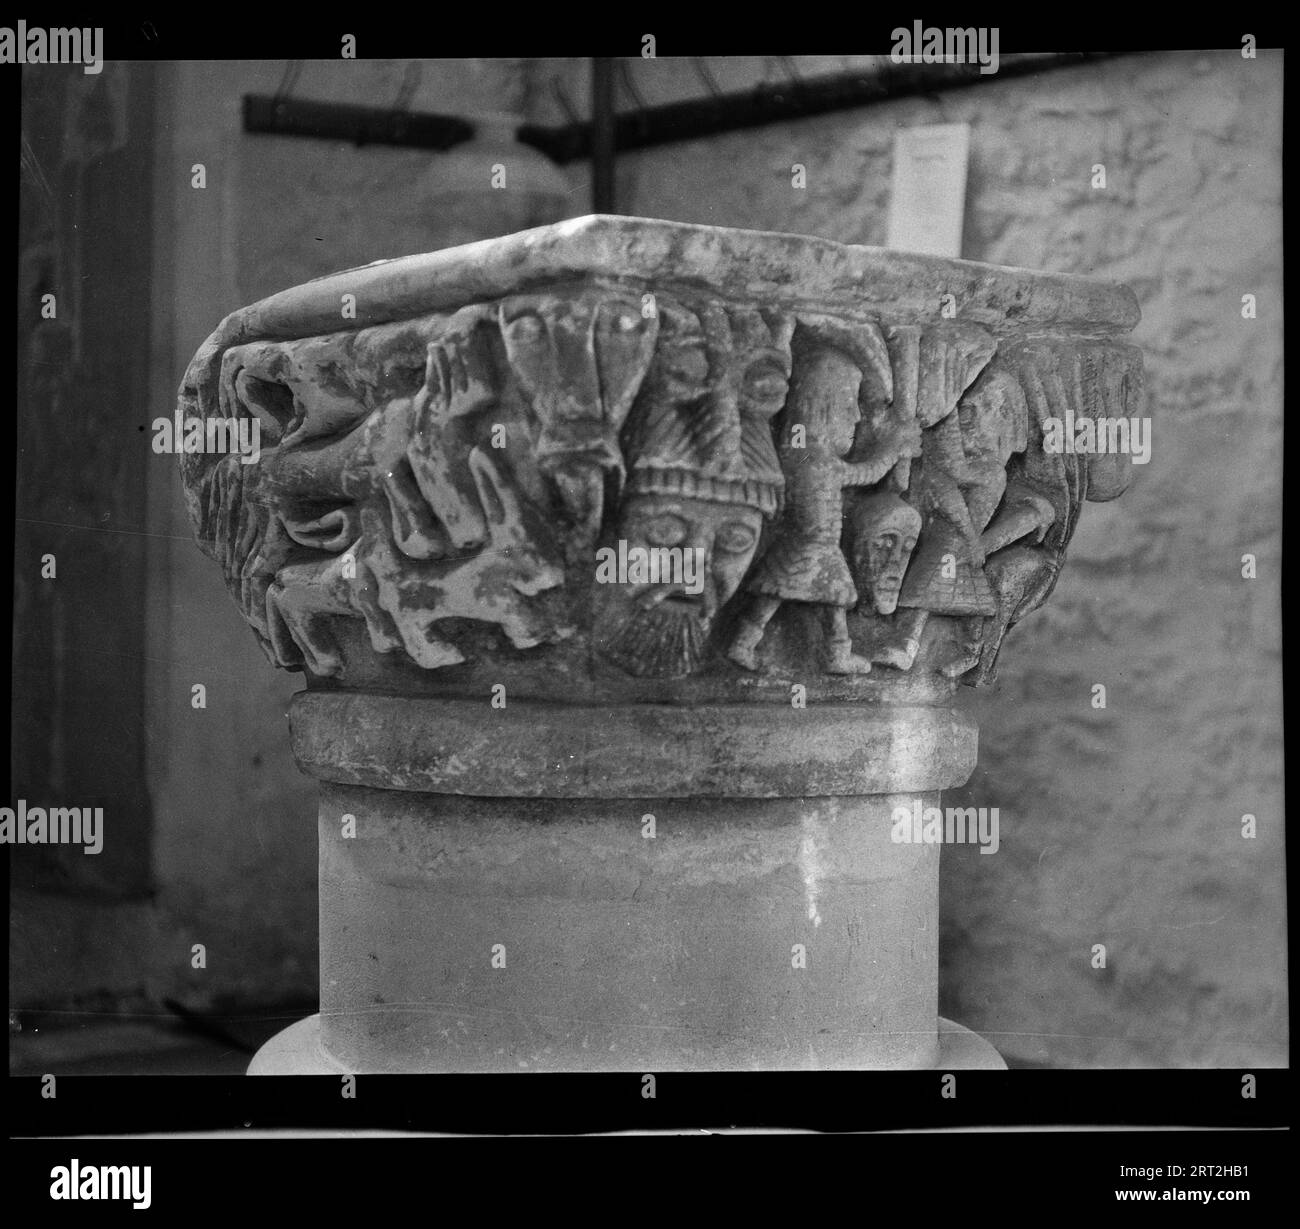 St Mary's Church, Luppitt, Luppitt, East Devon, Devon, 1940-1949. Detail of an early Norman or late Saxon font with a carved square bowl on a cylindrical shaft, the top few inches of which appear to be original and the rest modern. The angle of the image shows two sides of the bowl, one including the scene of two men fighting with shields and swords, while the other depicts wild animals. A masked face on the corner can be seen more clearly and they separate the two scenes. The church has Norman origins and was rebuilt in te 13th and 14th centuries. Stock Photo